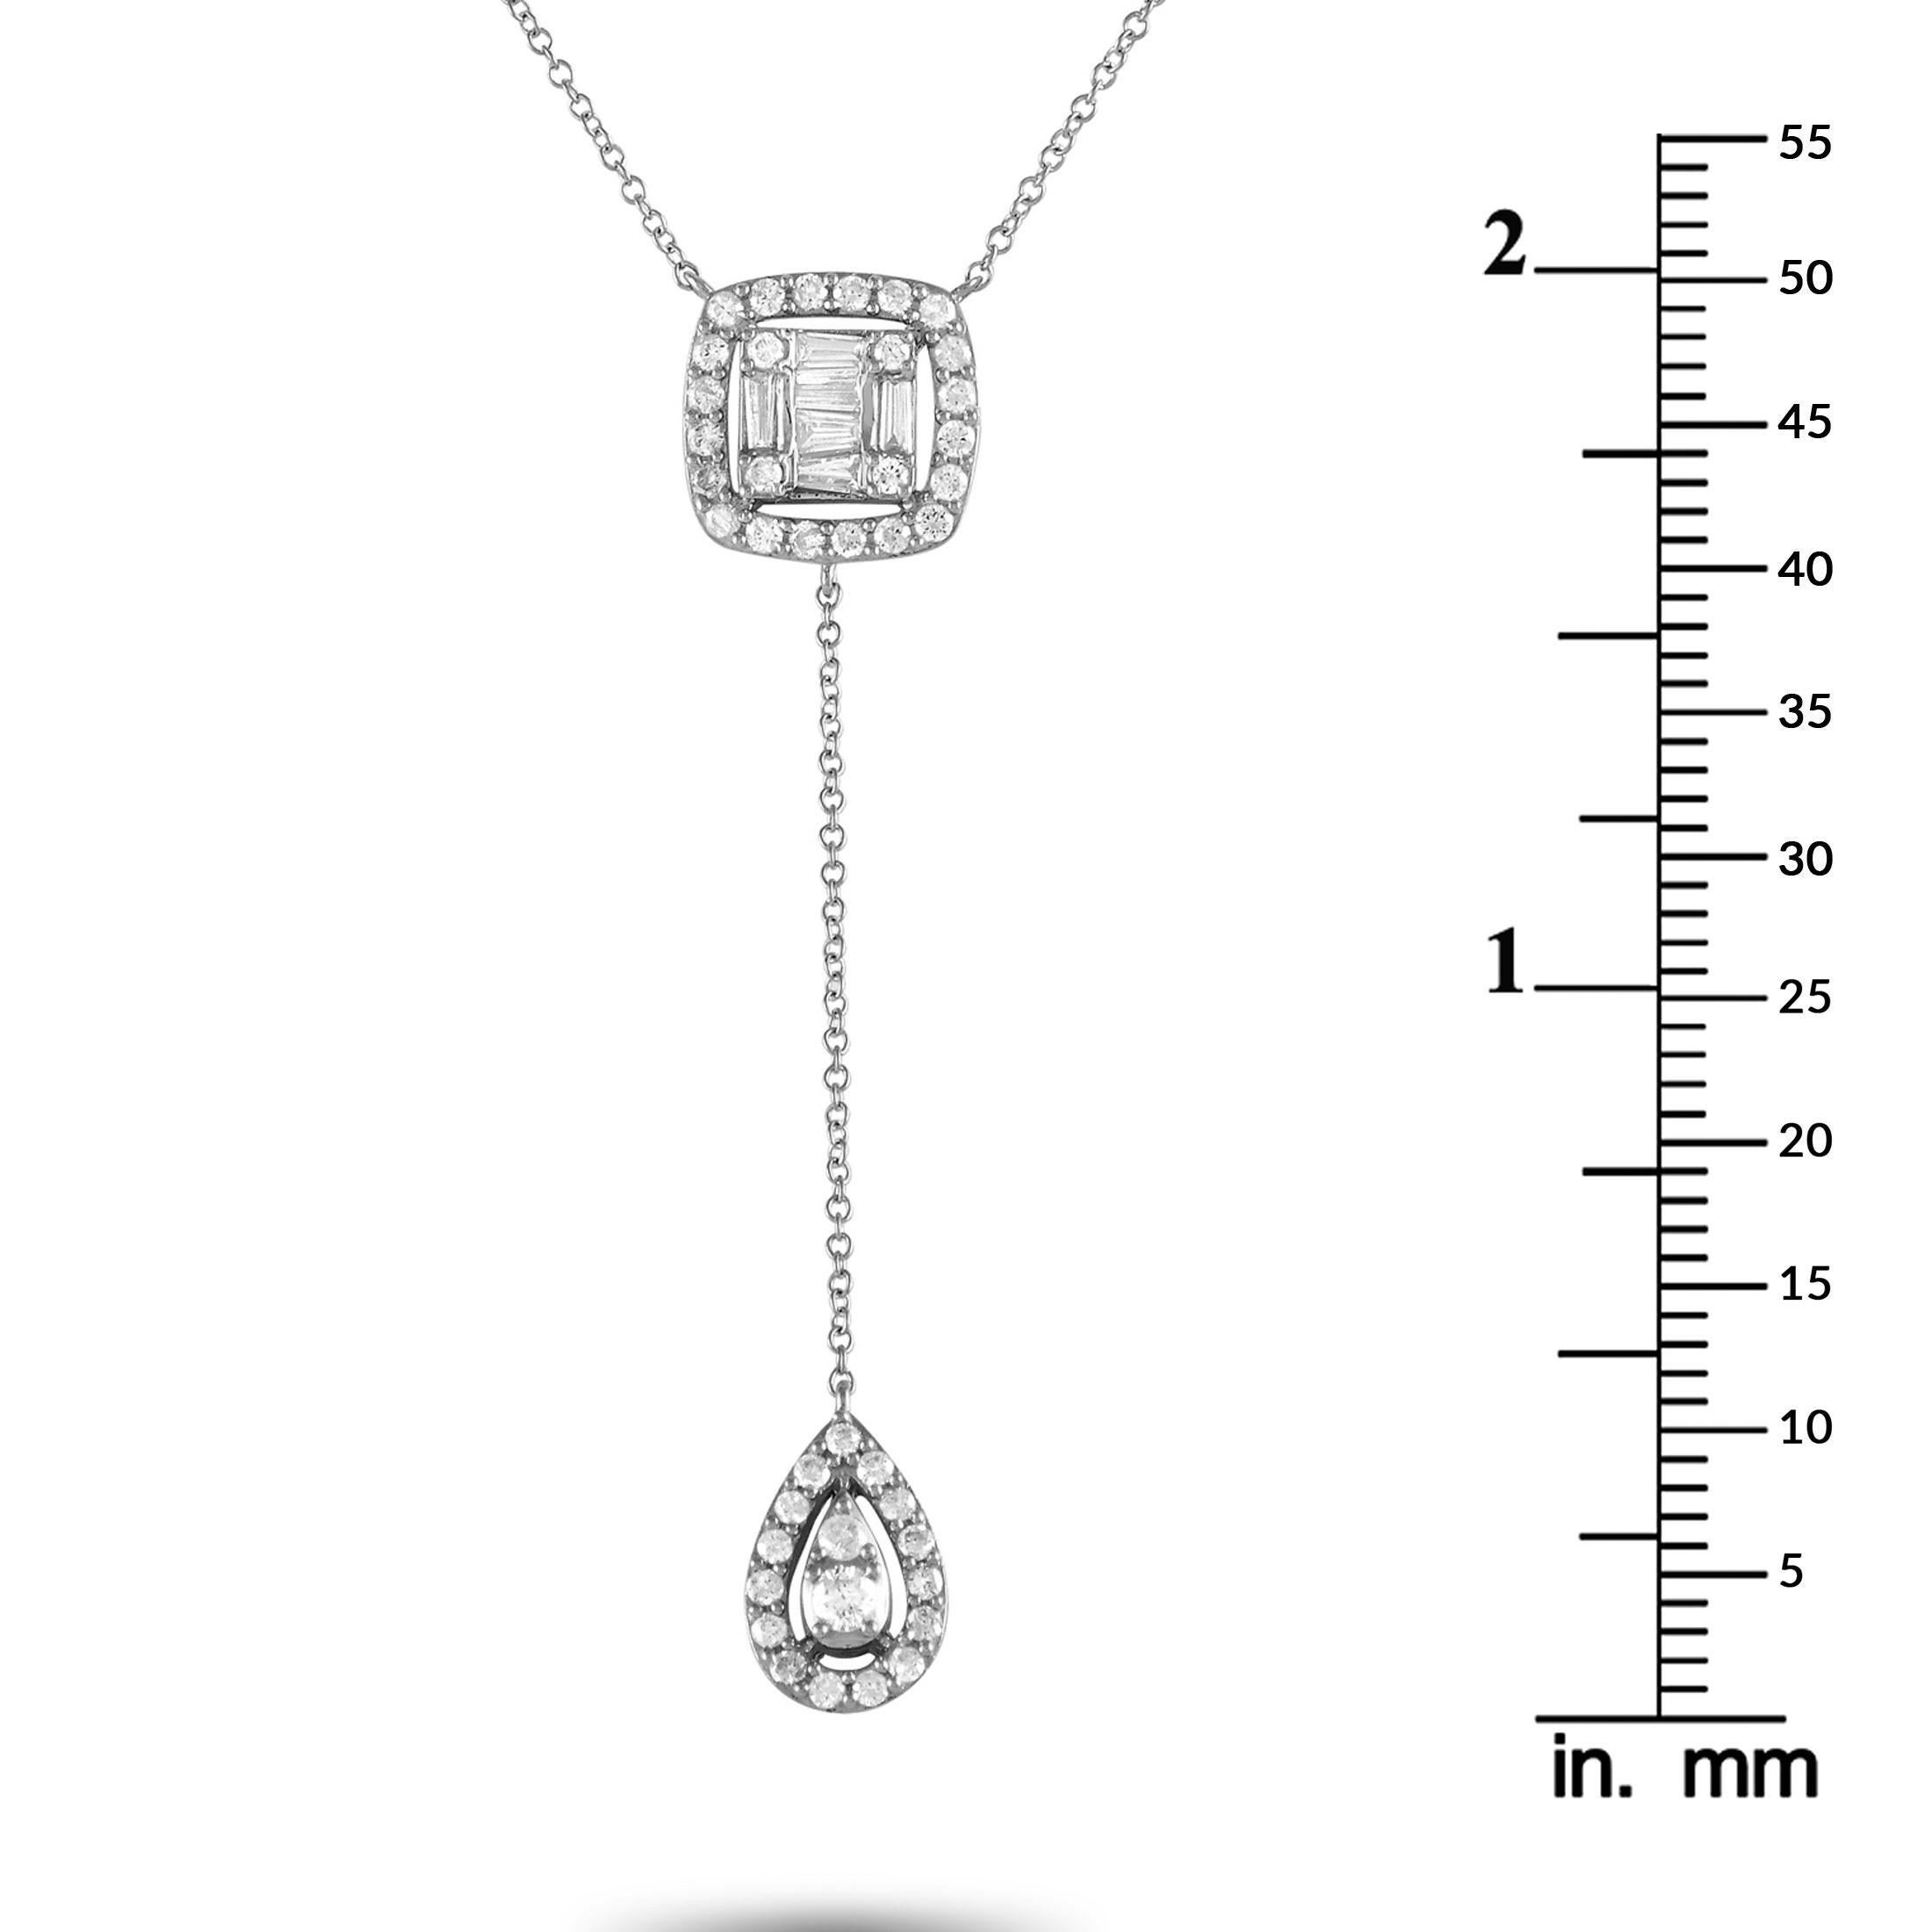 LB Exclusive 14K White Gold 0.65ct Diamond Necklace NK013181 In New Condition For Sale In Southampton, PA